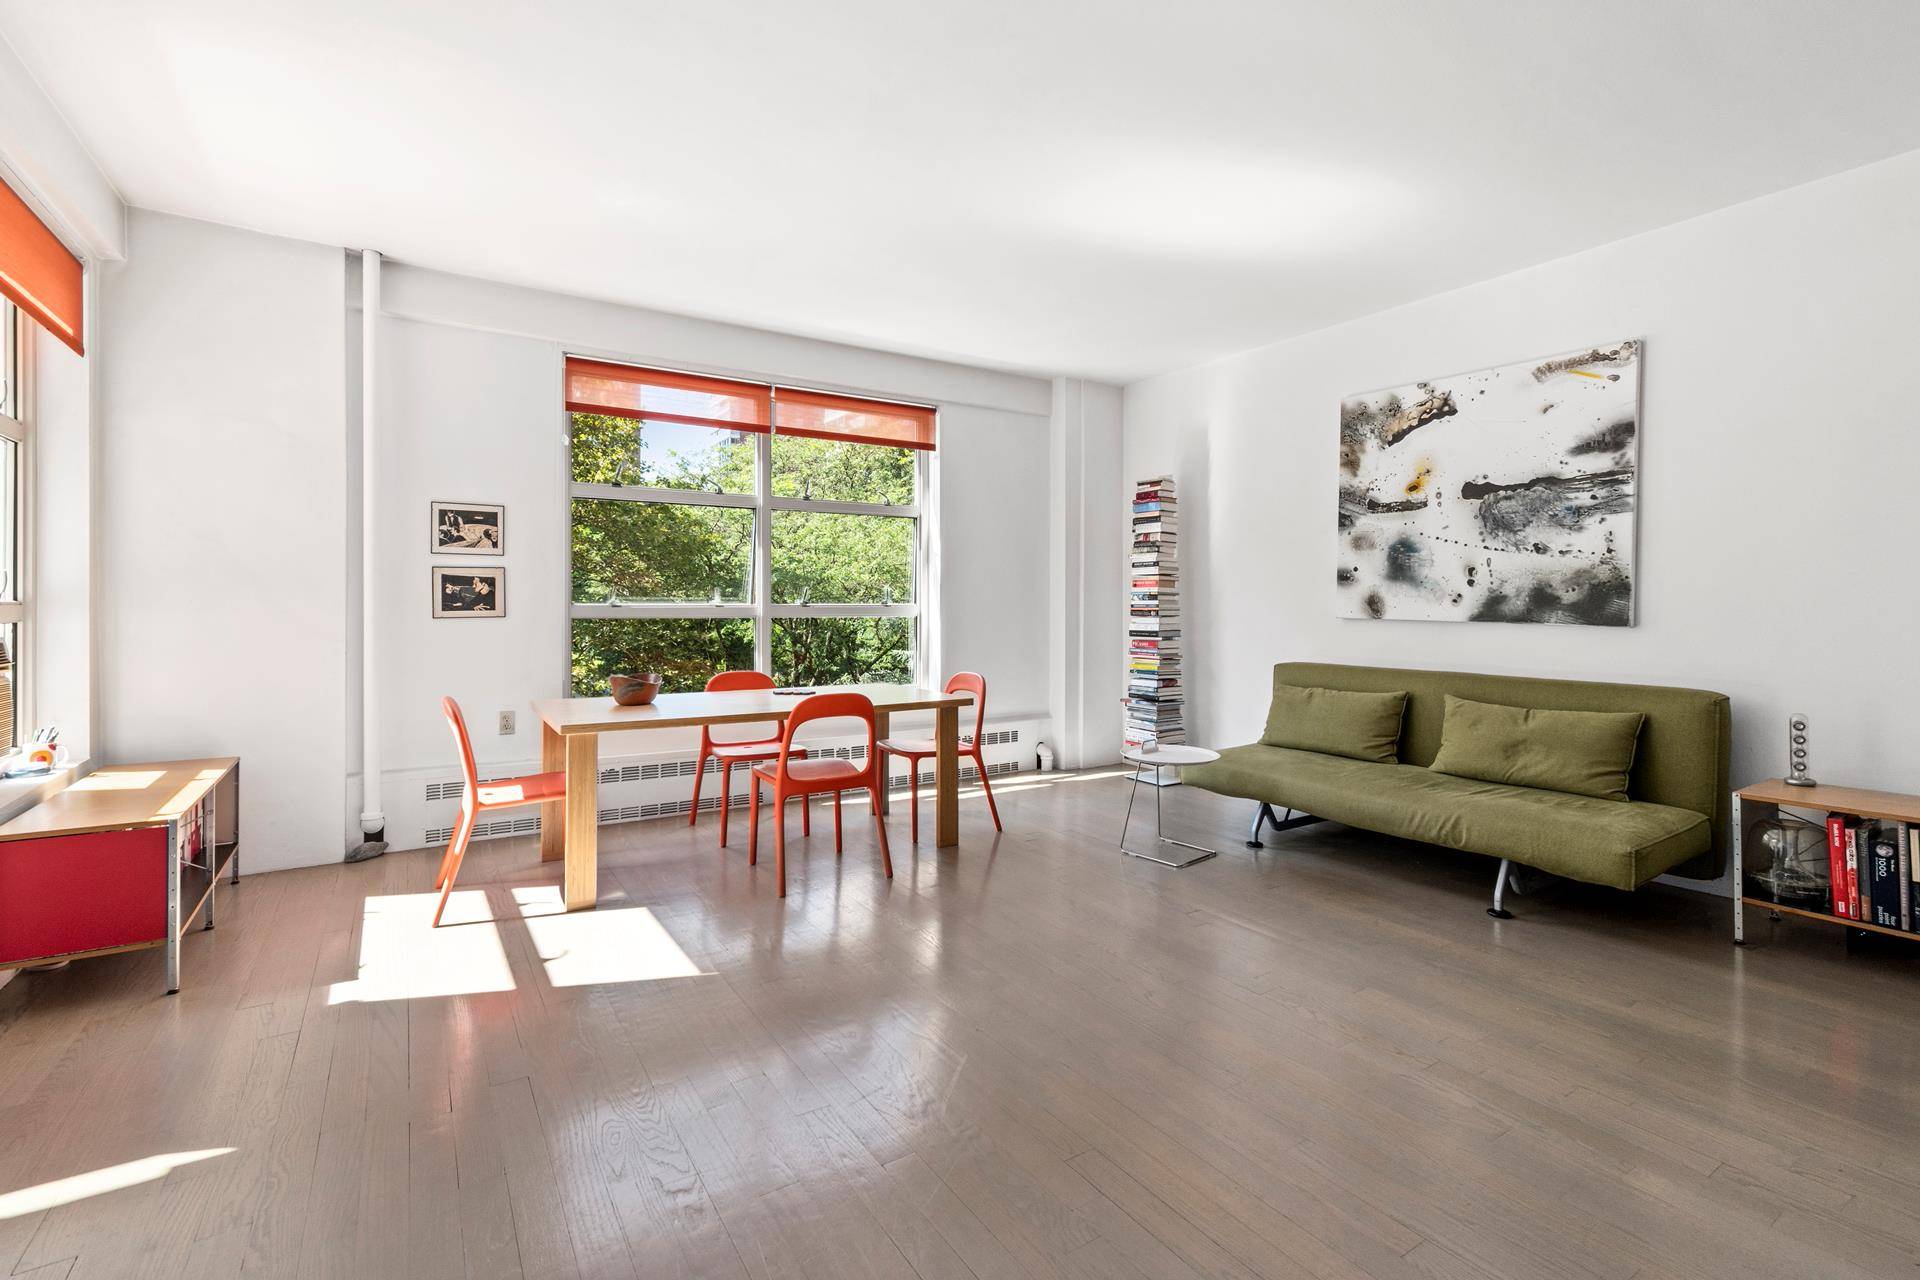 Welcome to your sunny sanctuary in Morningside Gardens, a thriving co operative community in desirable and culturally rich Morningside Heights.